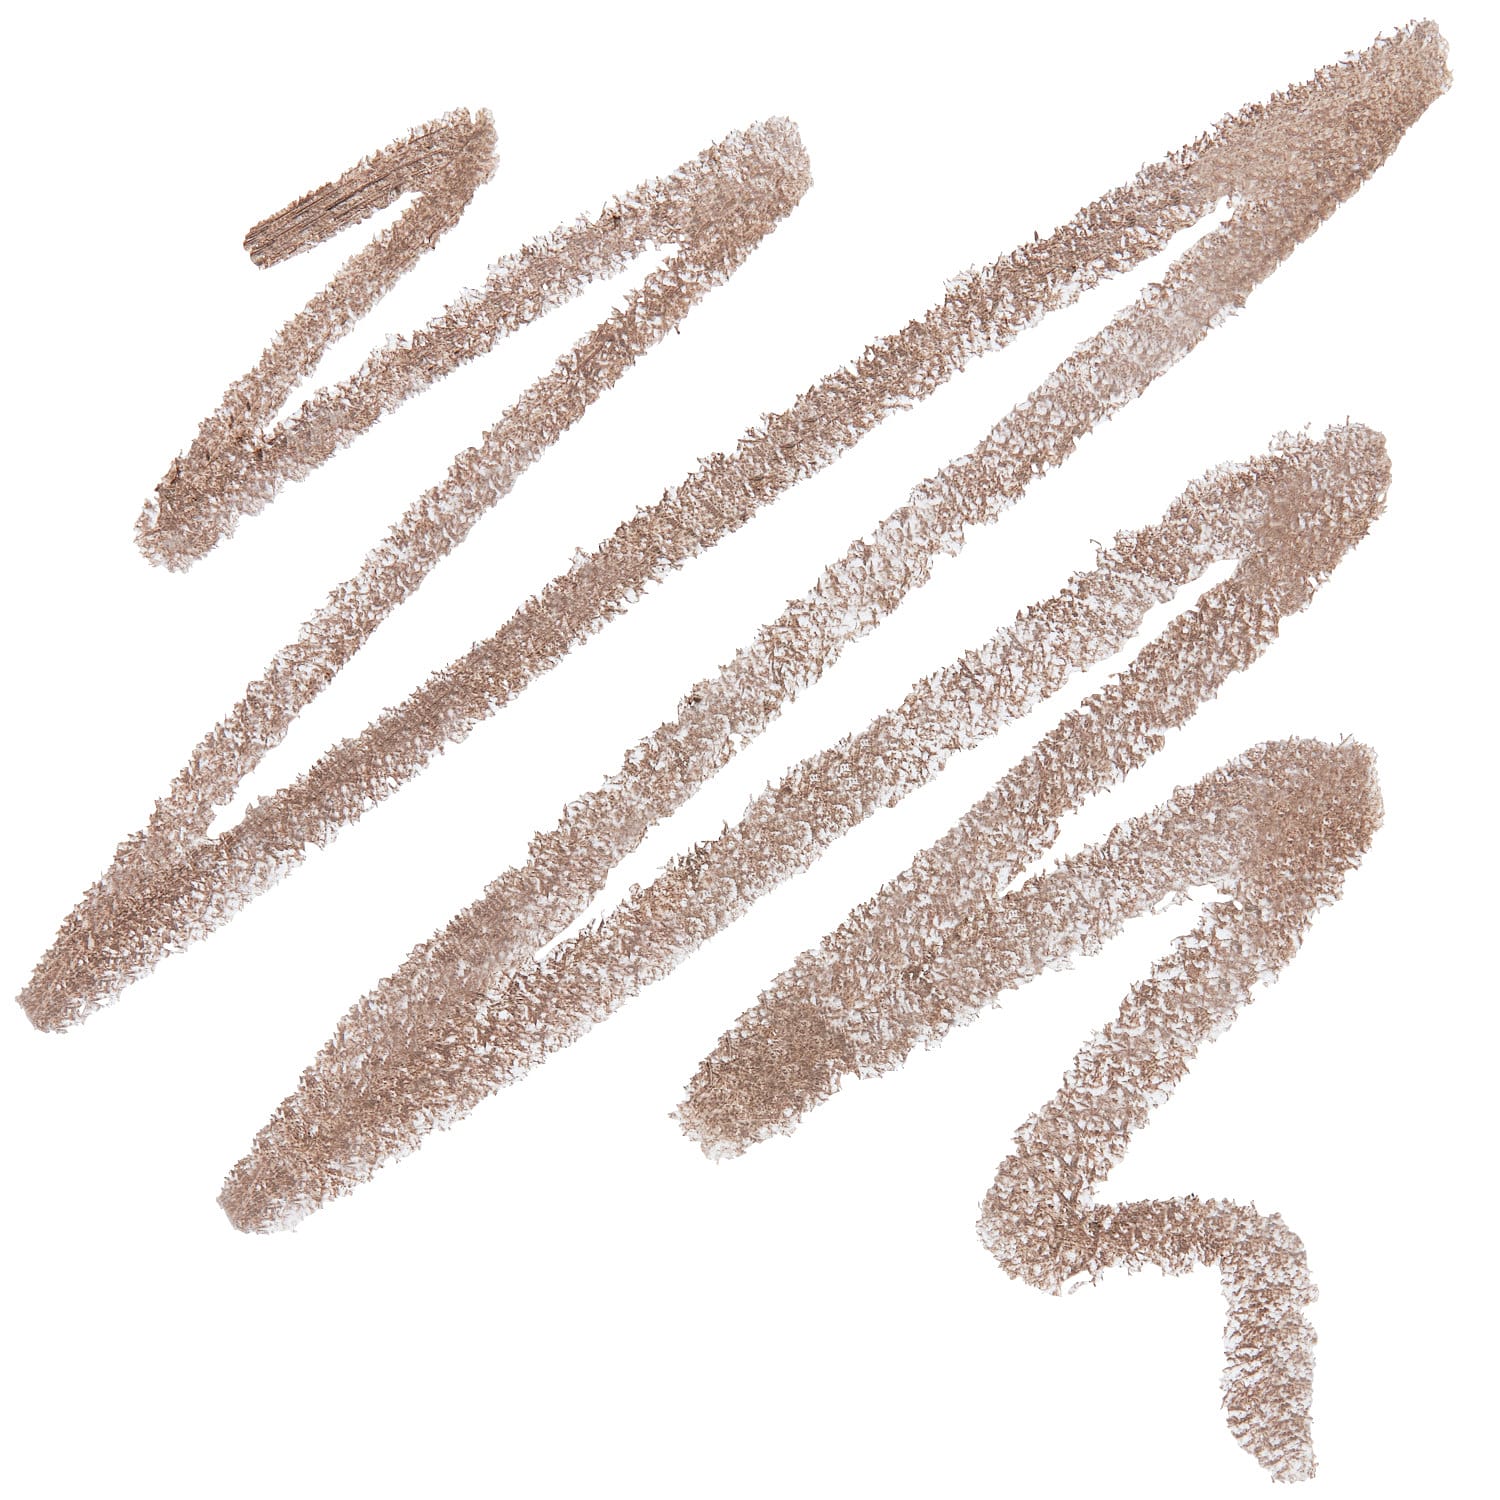 Express Brow Shaping Pencil 02 Blonde